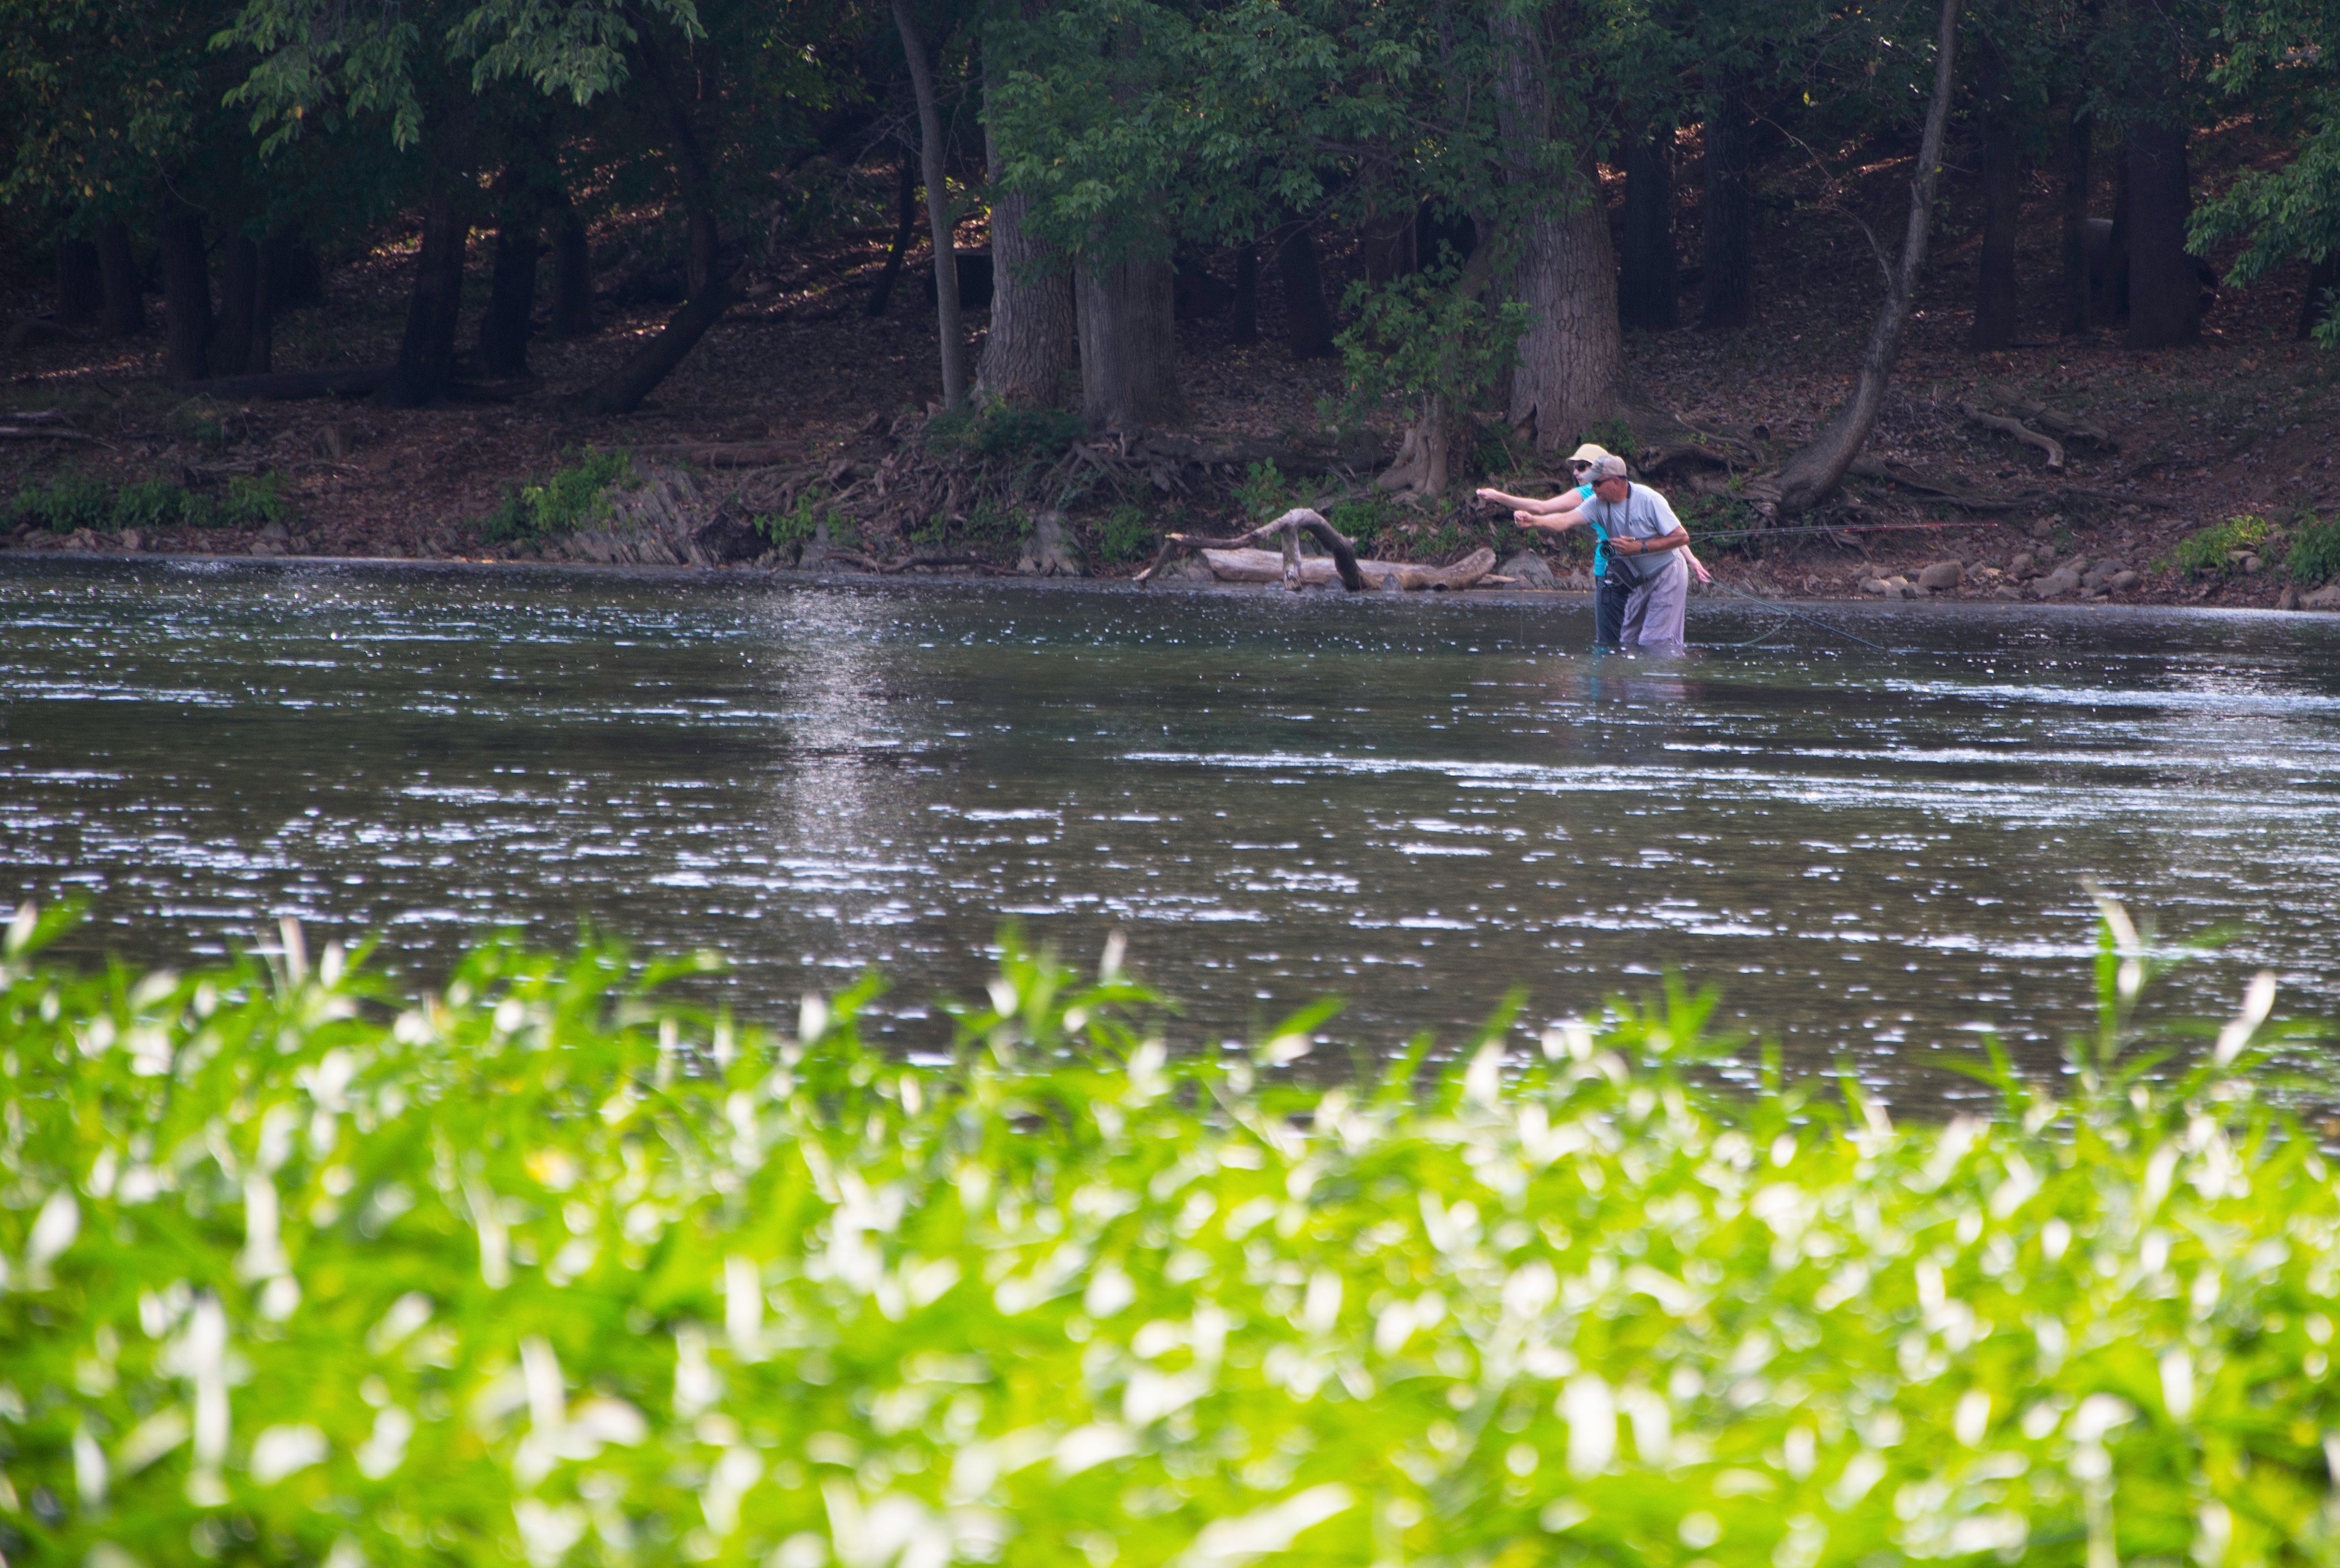 Person receiving instructions on fly fishing techniques for smallmouth bass in a river - Edinburg, Virginia - Murrays Fly Shop